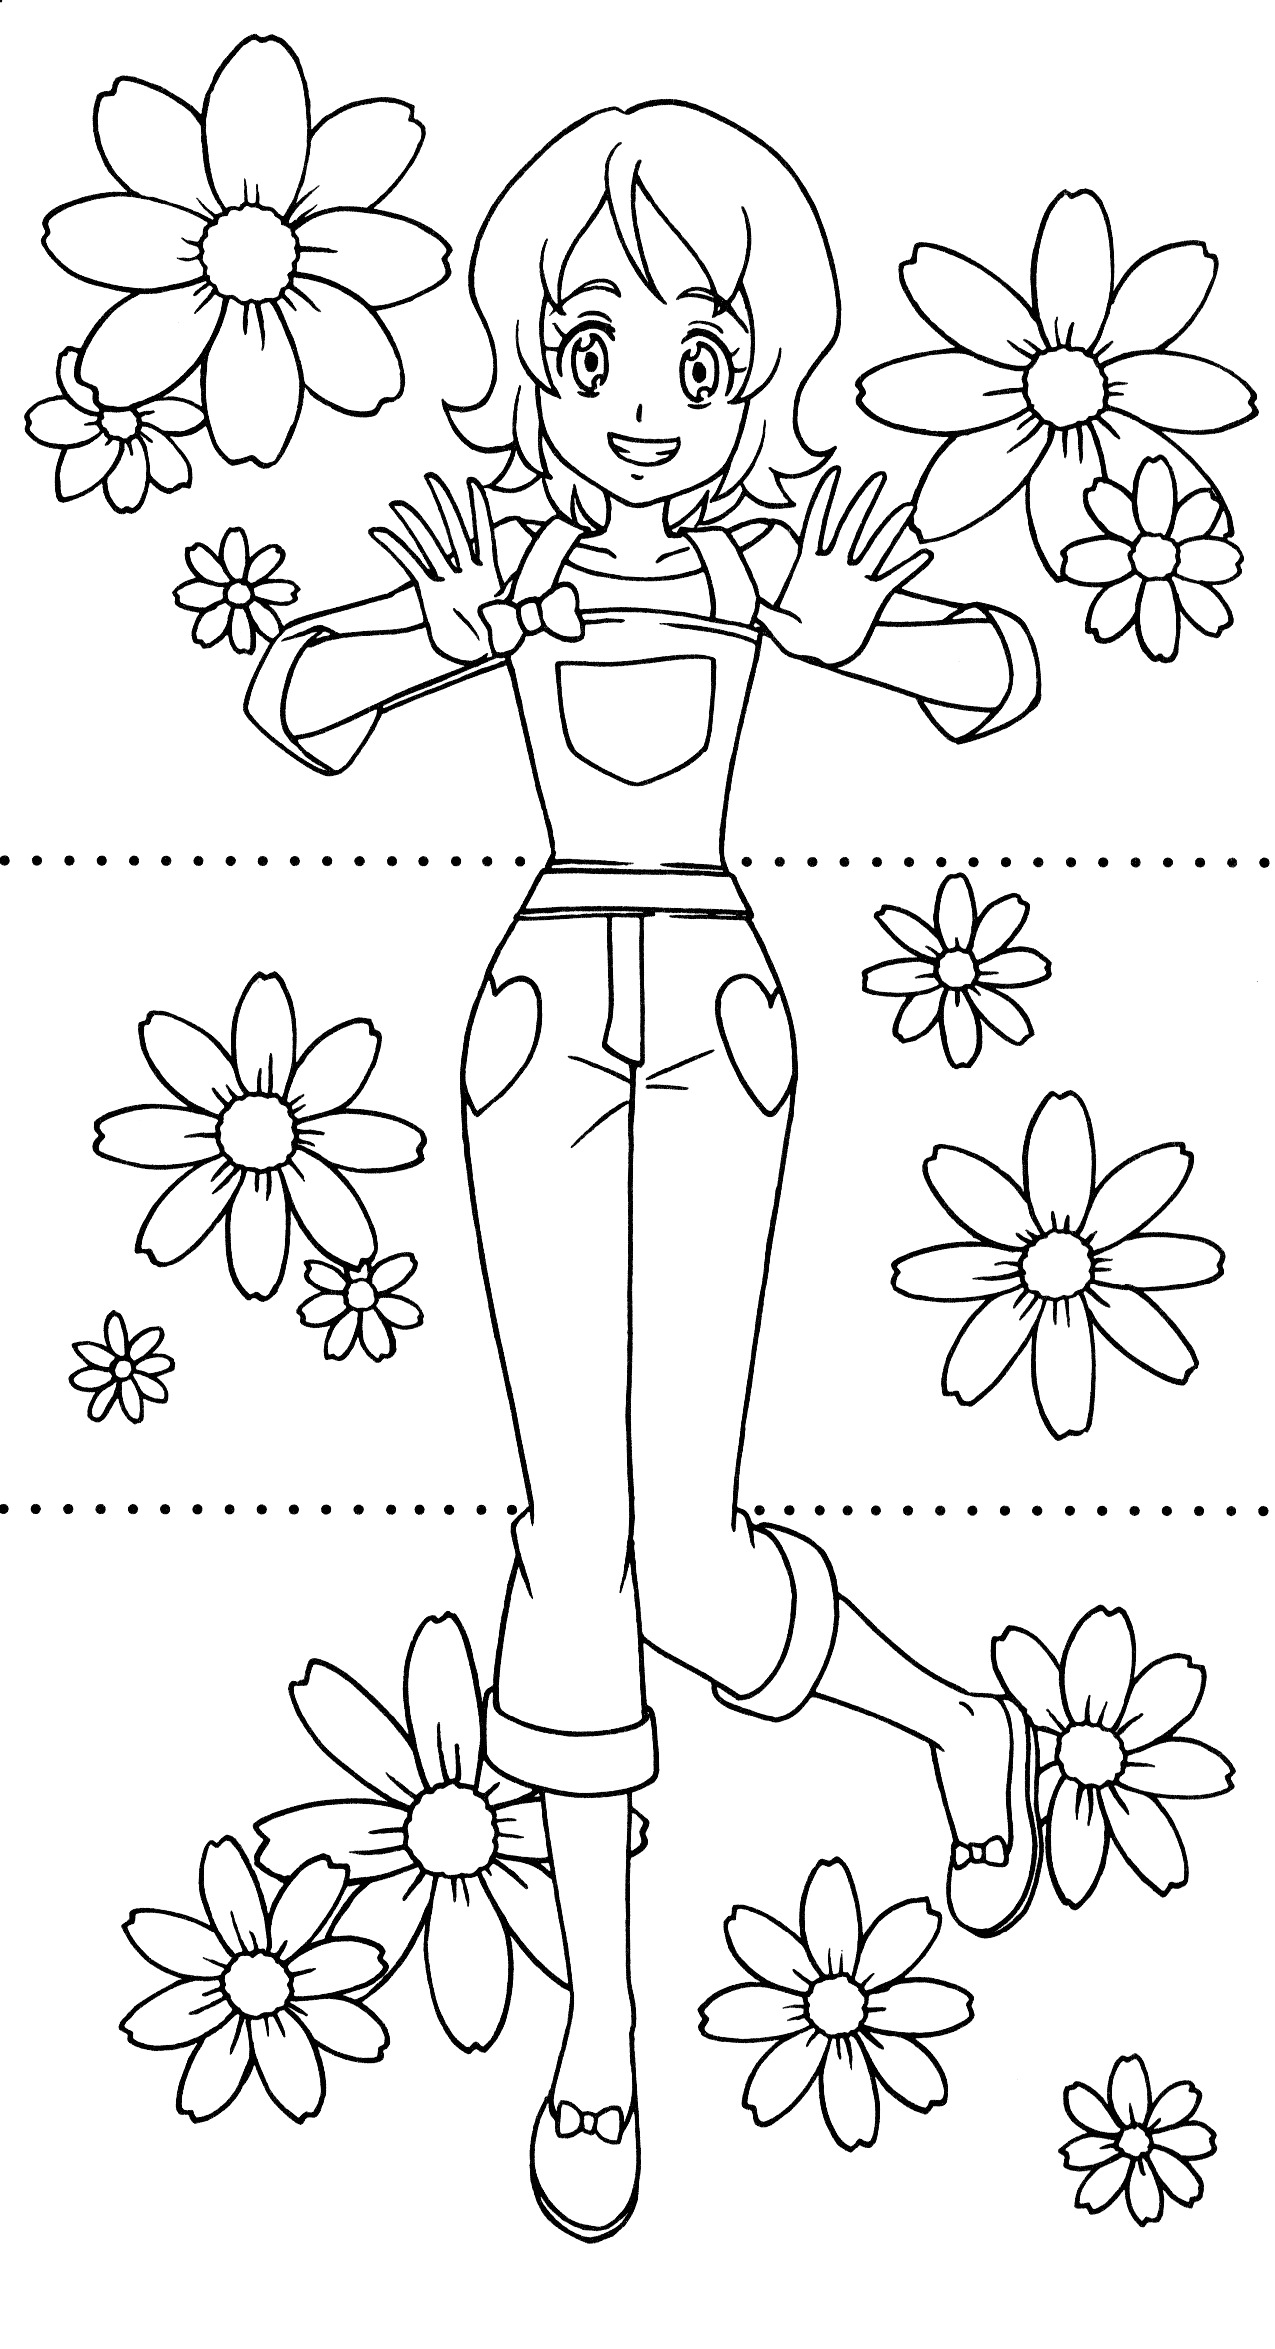 Happiness Charge Precure Dressup Coloring Book 14